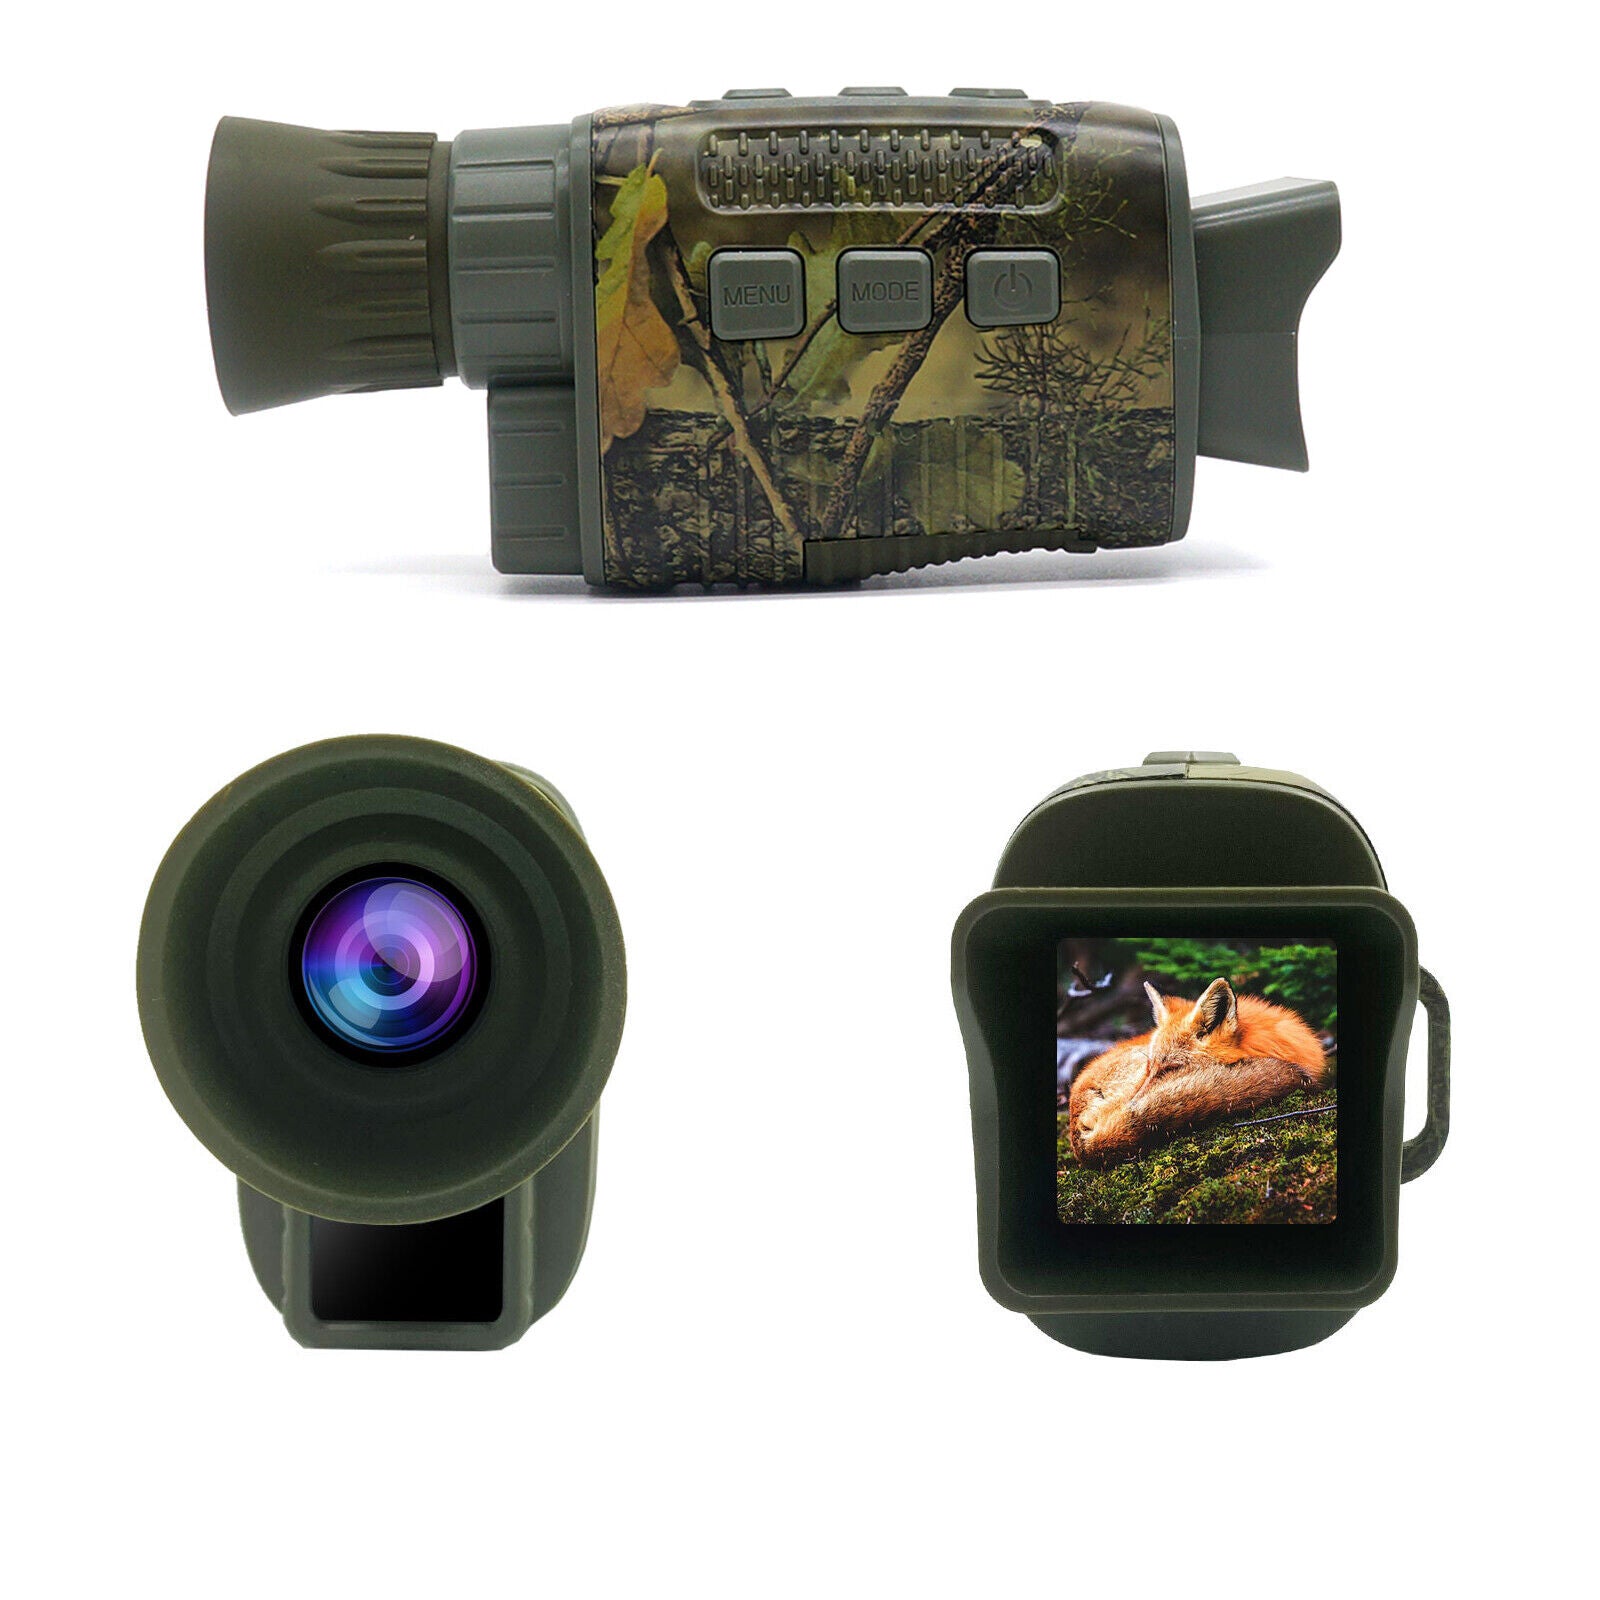 Observe the beauty of nature with precision through this monocular telescope, featuring a camouflage design perfect for wildlife enthusiasts.